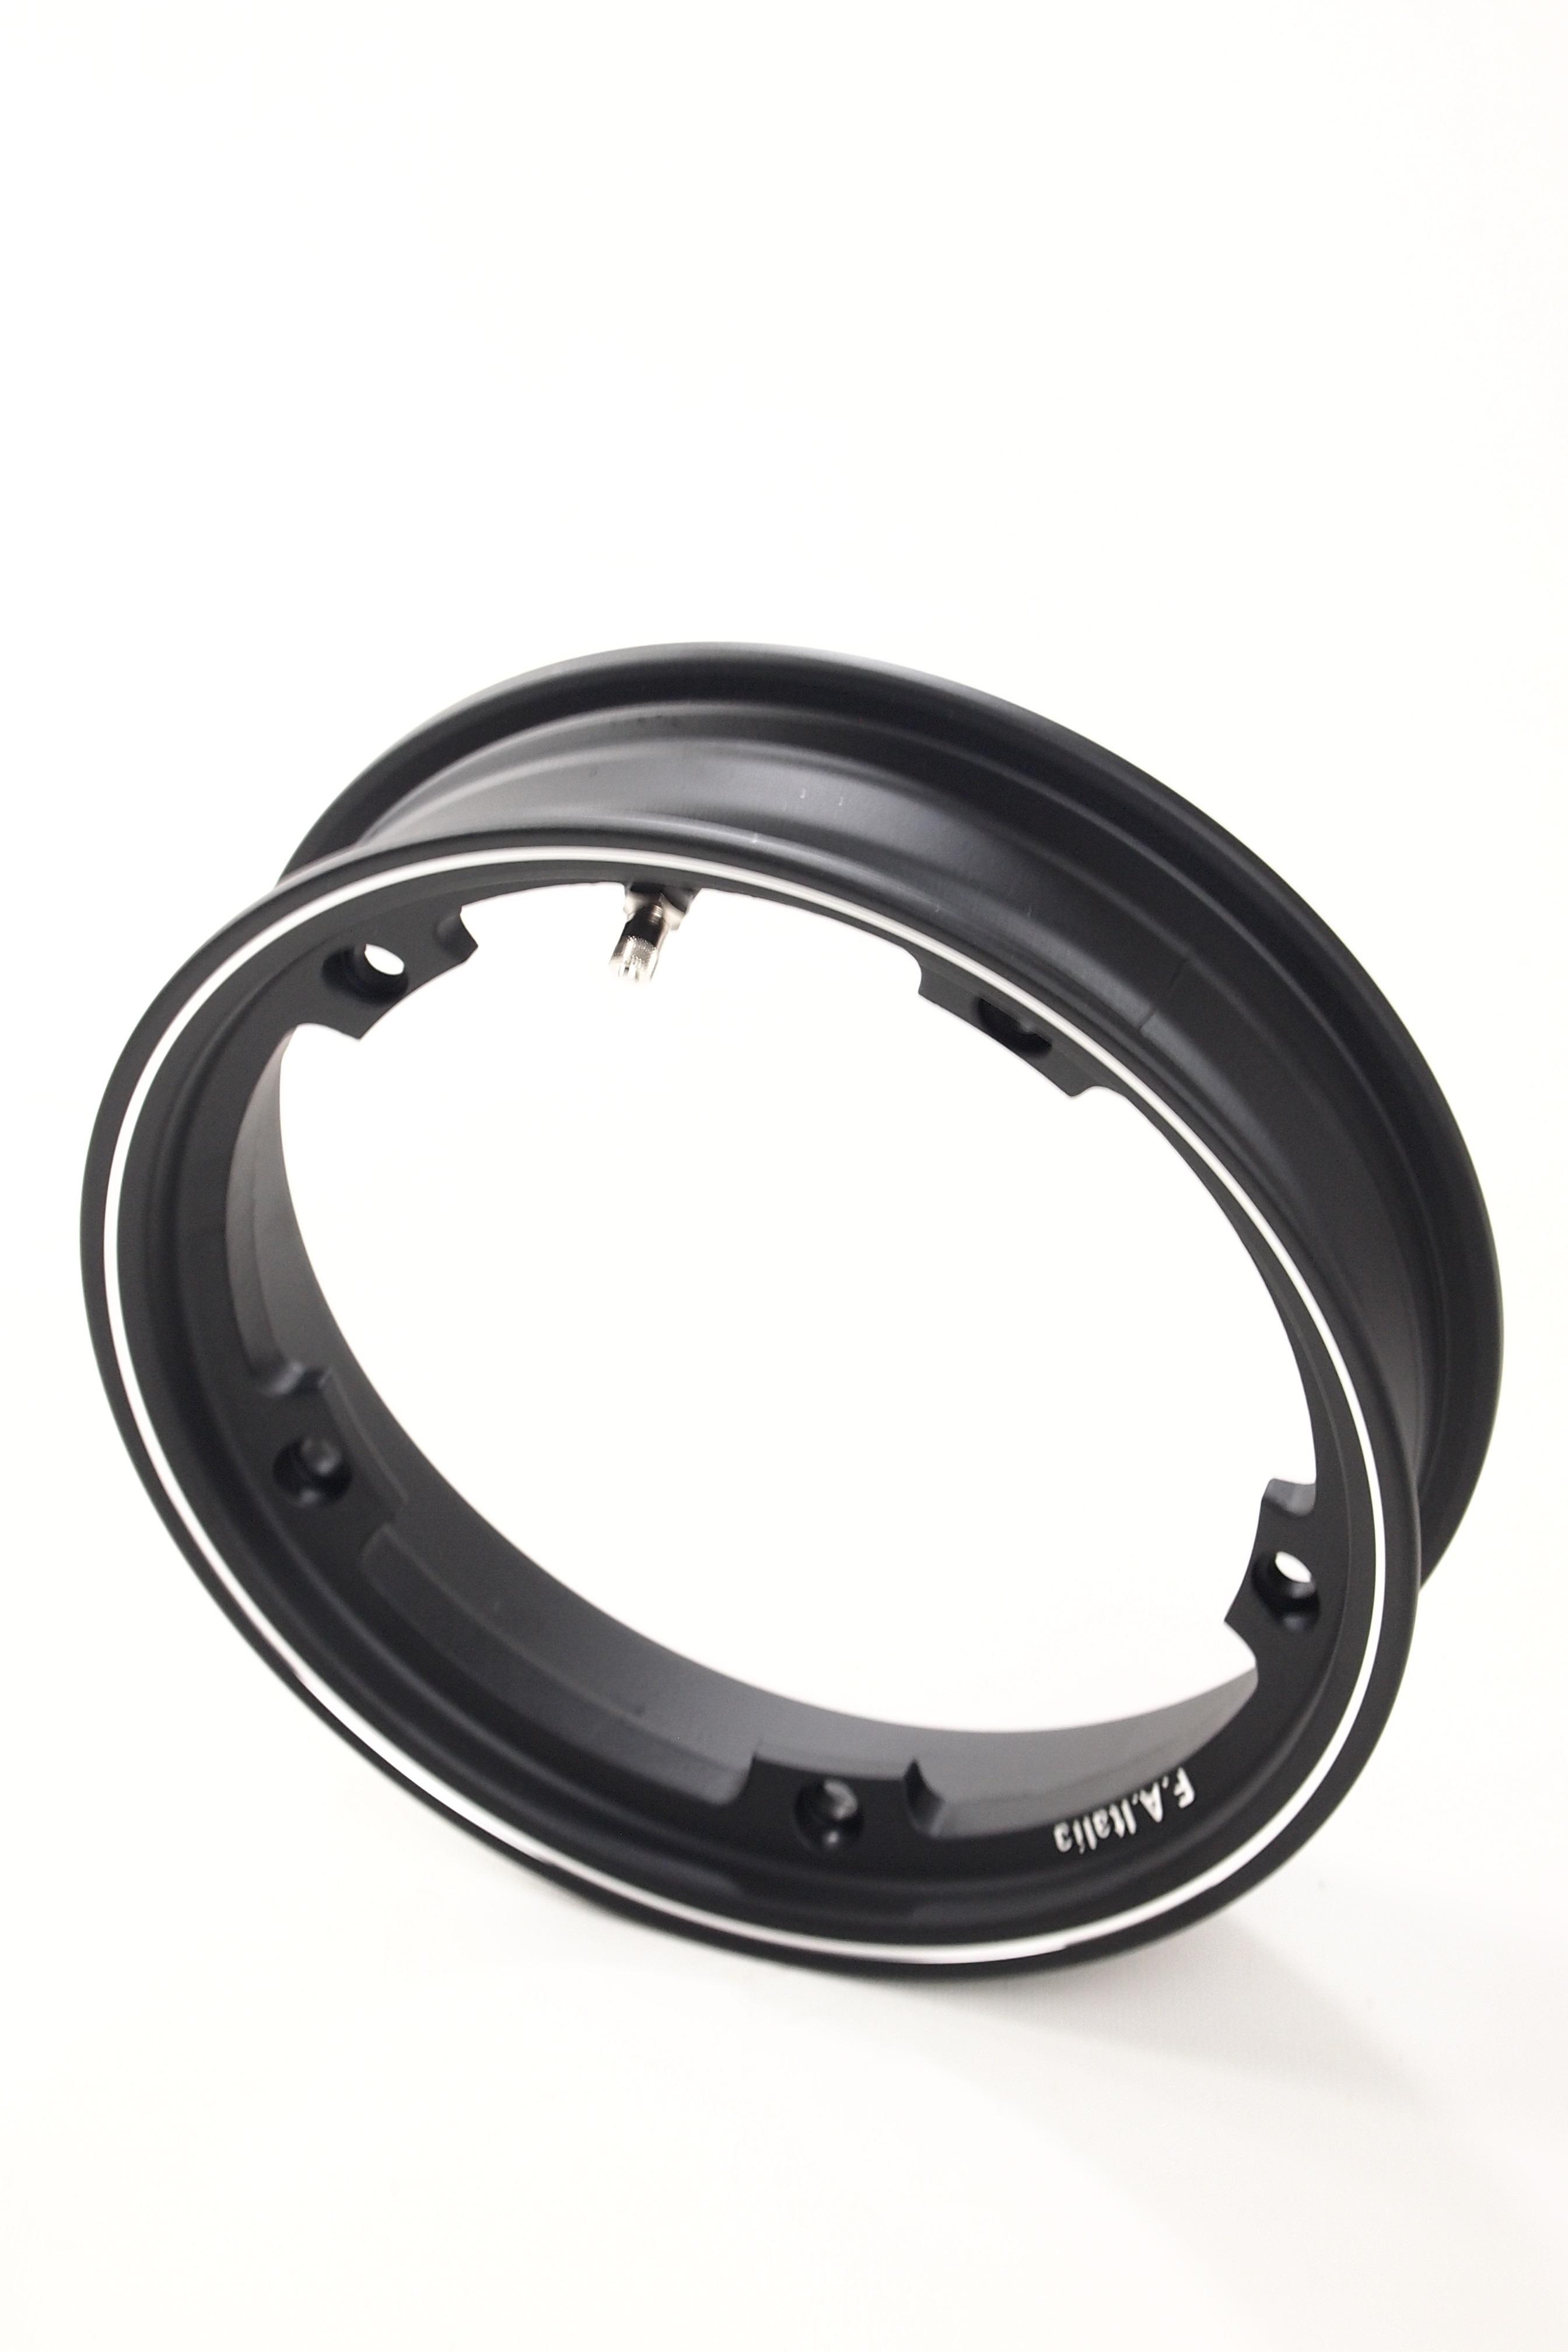 Circle tubeless channel alloy 2.10x10 "black for Vespa PX - 50 - Primavera - ET3 (including valve and nuts)